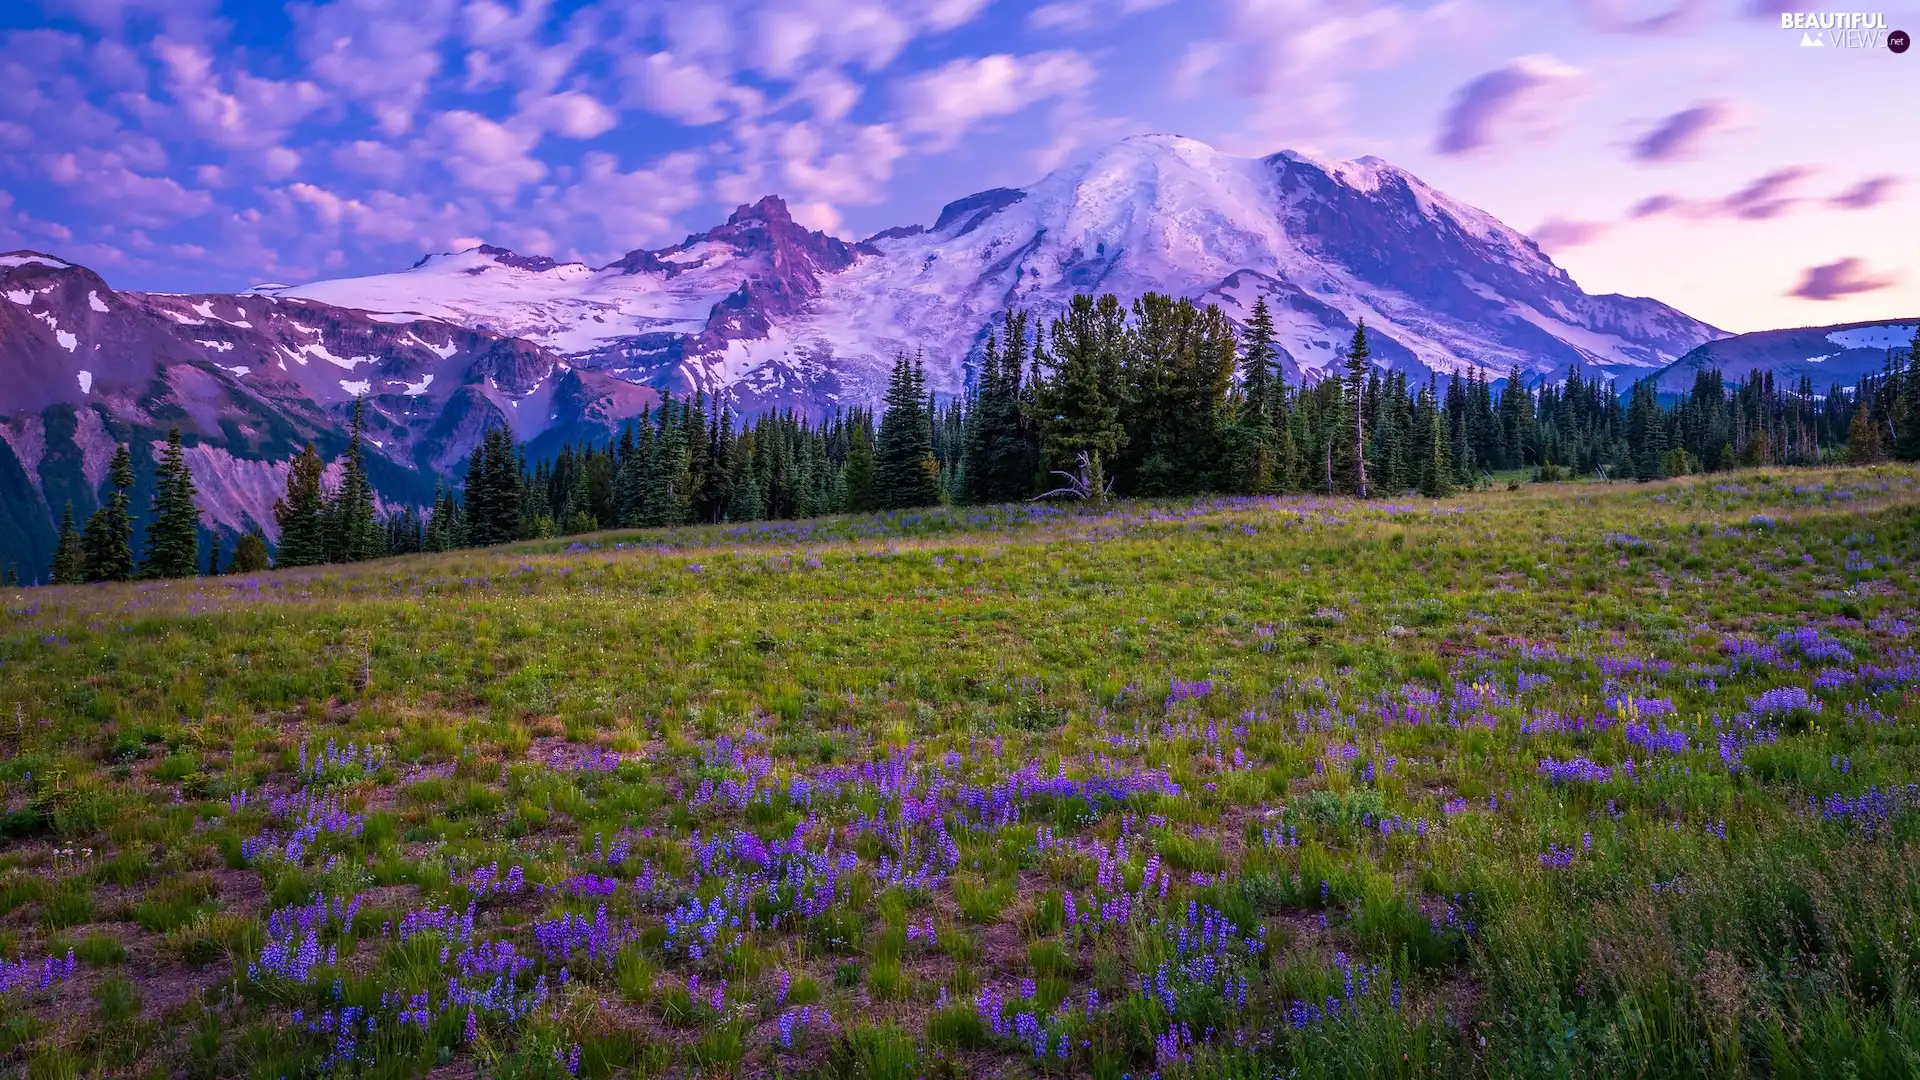 Mountains, Washington State, Flowers, Mount Rainier National Park, The United States, Meadow, clouds